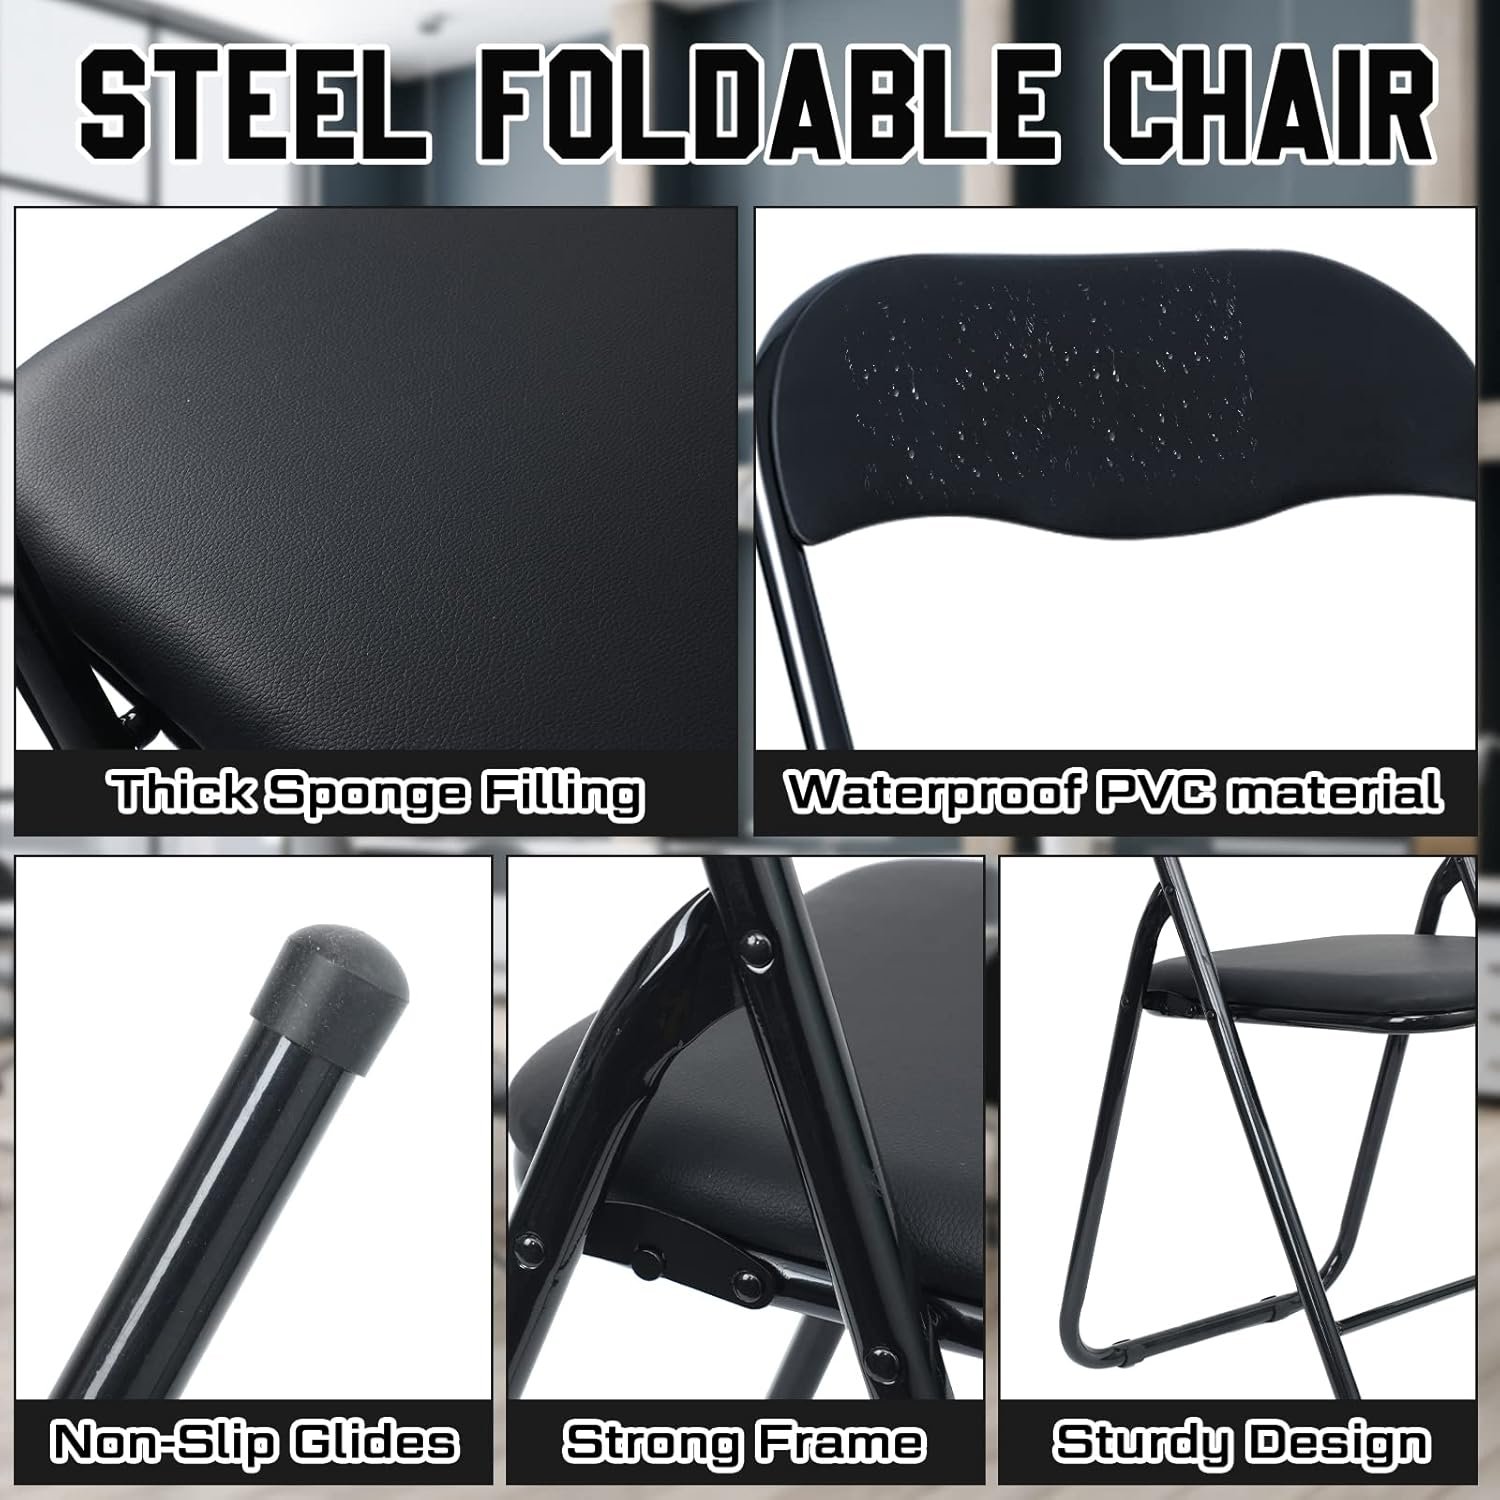 Kathfly Folding Chair Set Review